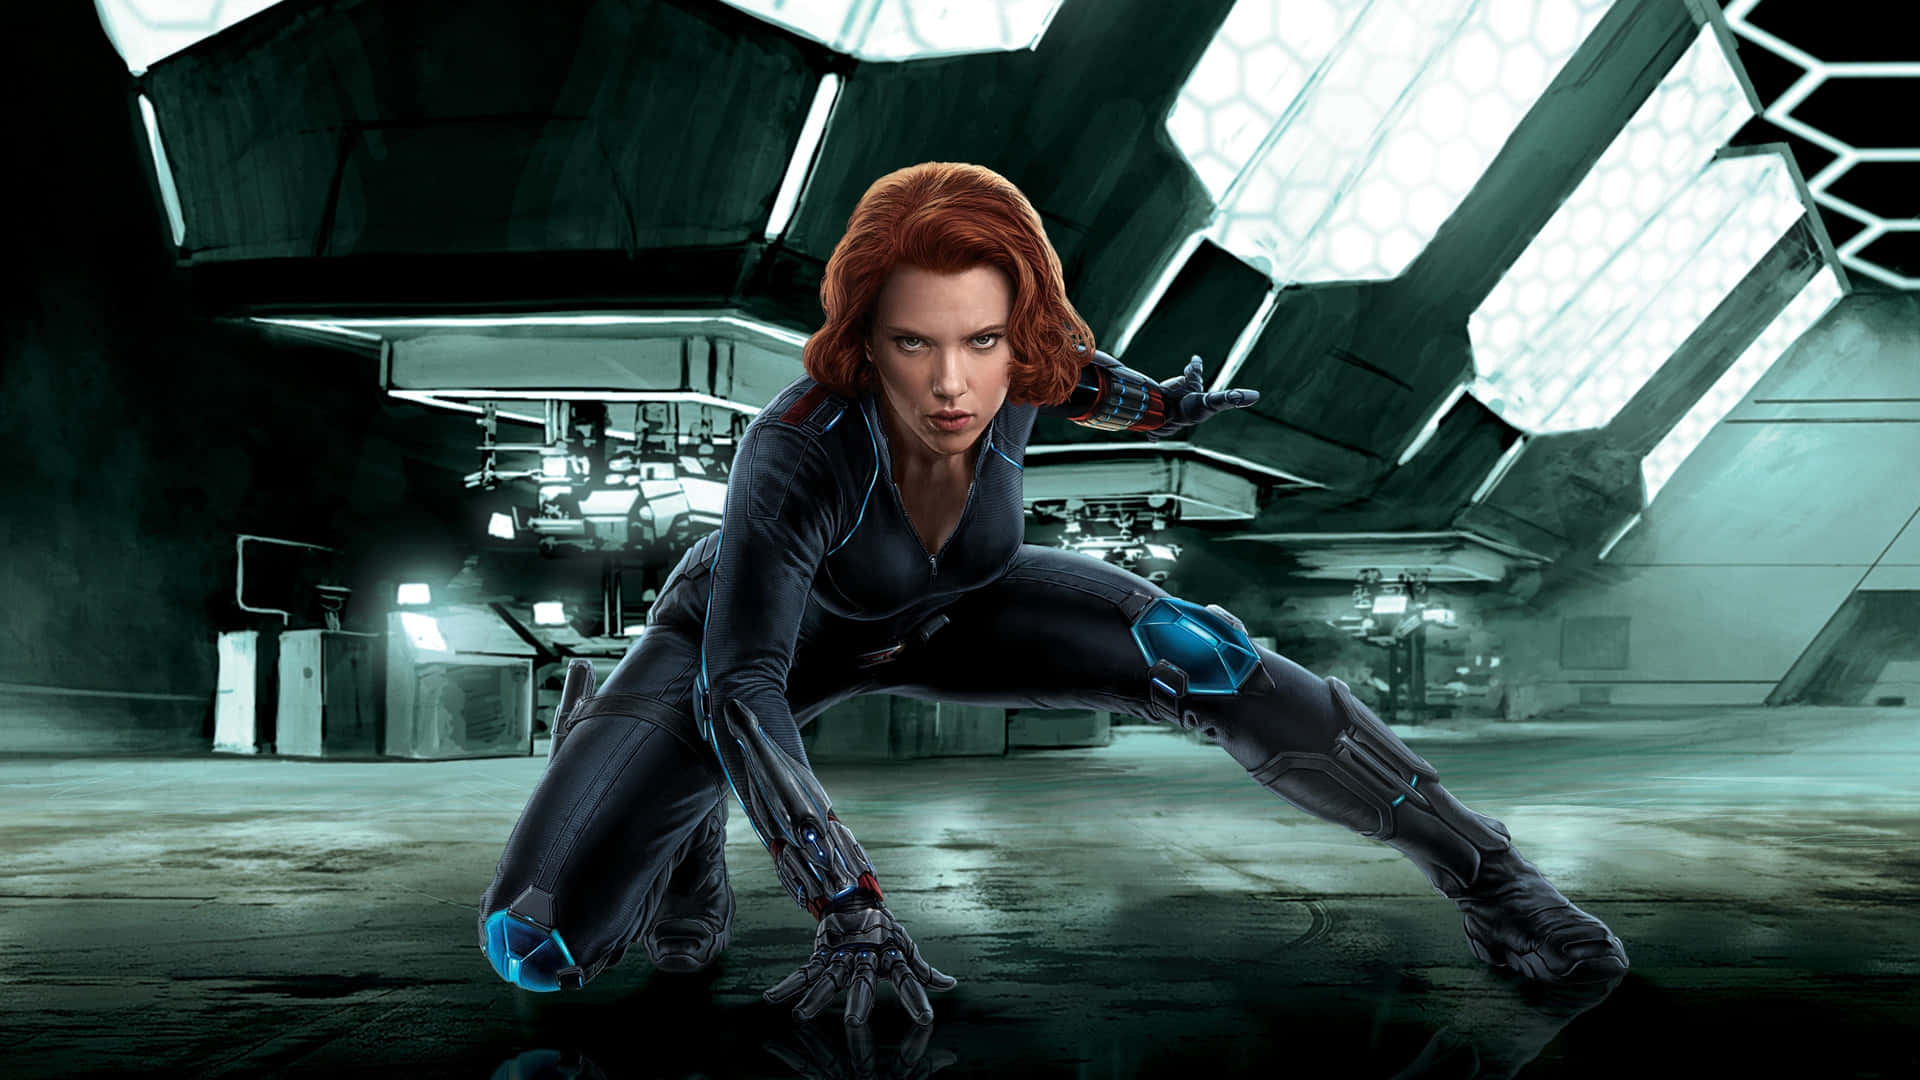 Black Widow: Ready to Take On the World